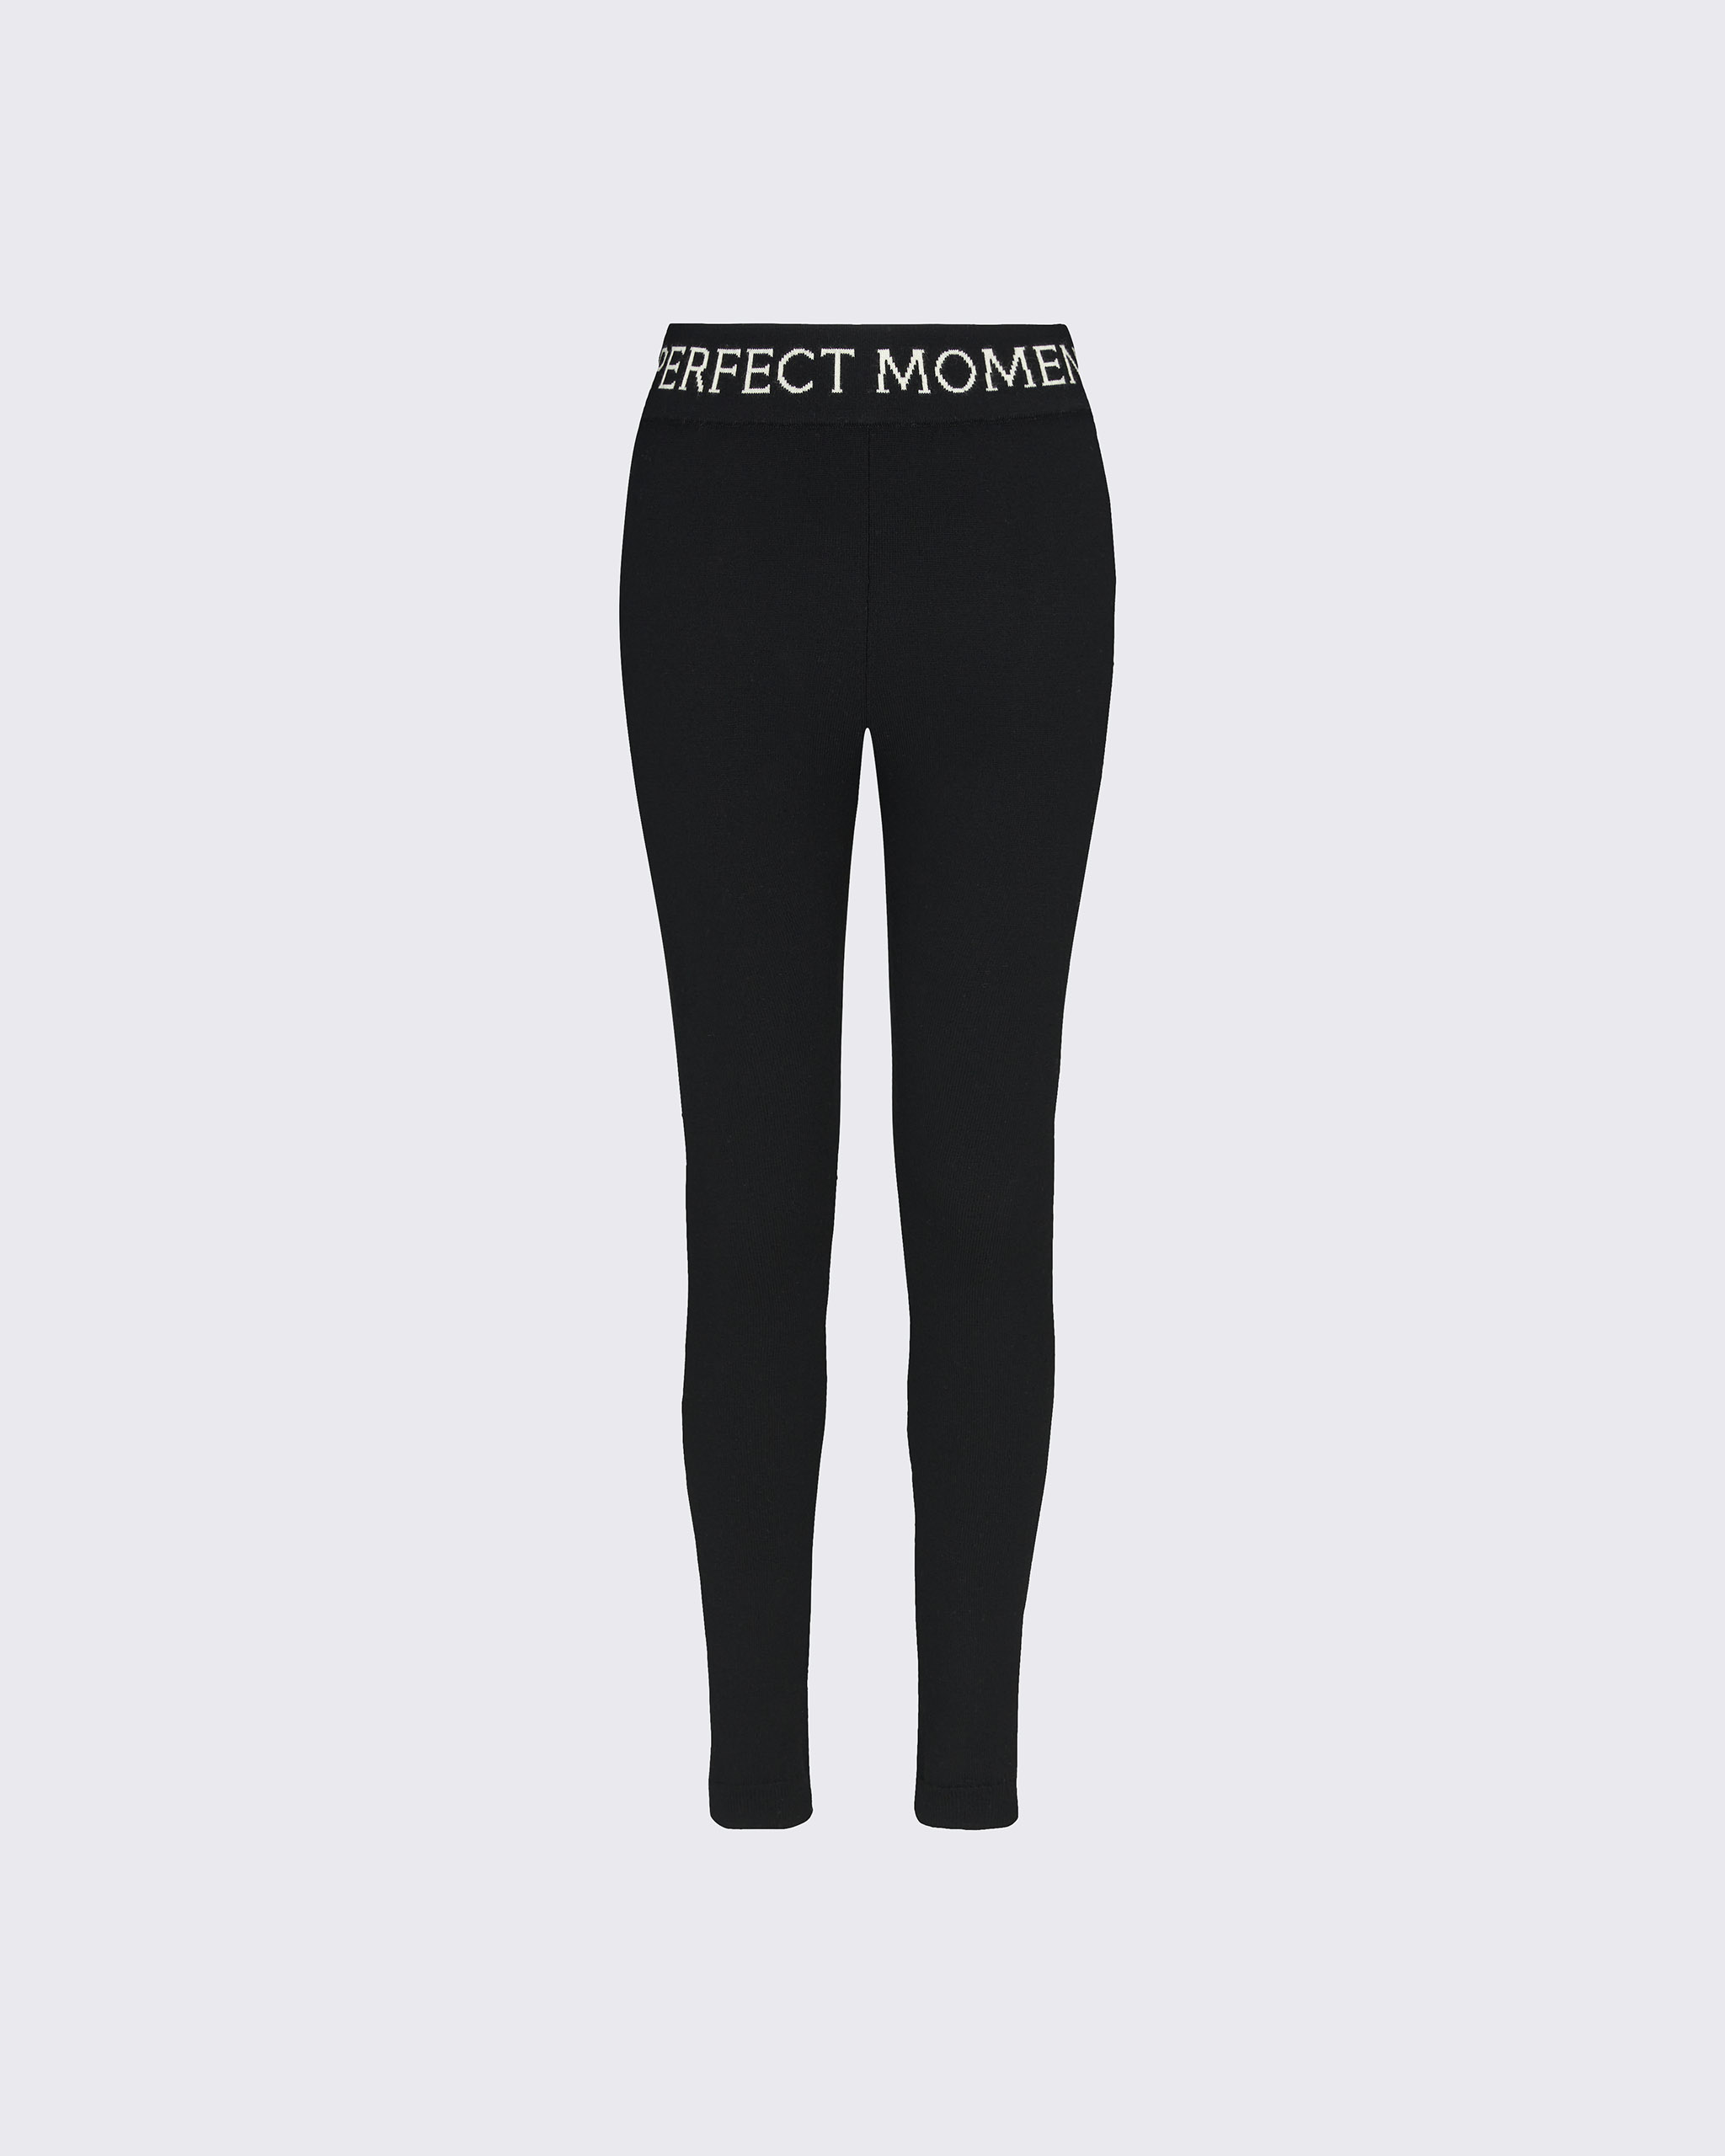 Aster knitted wool leggings in black - Perfect Moment